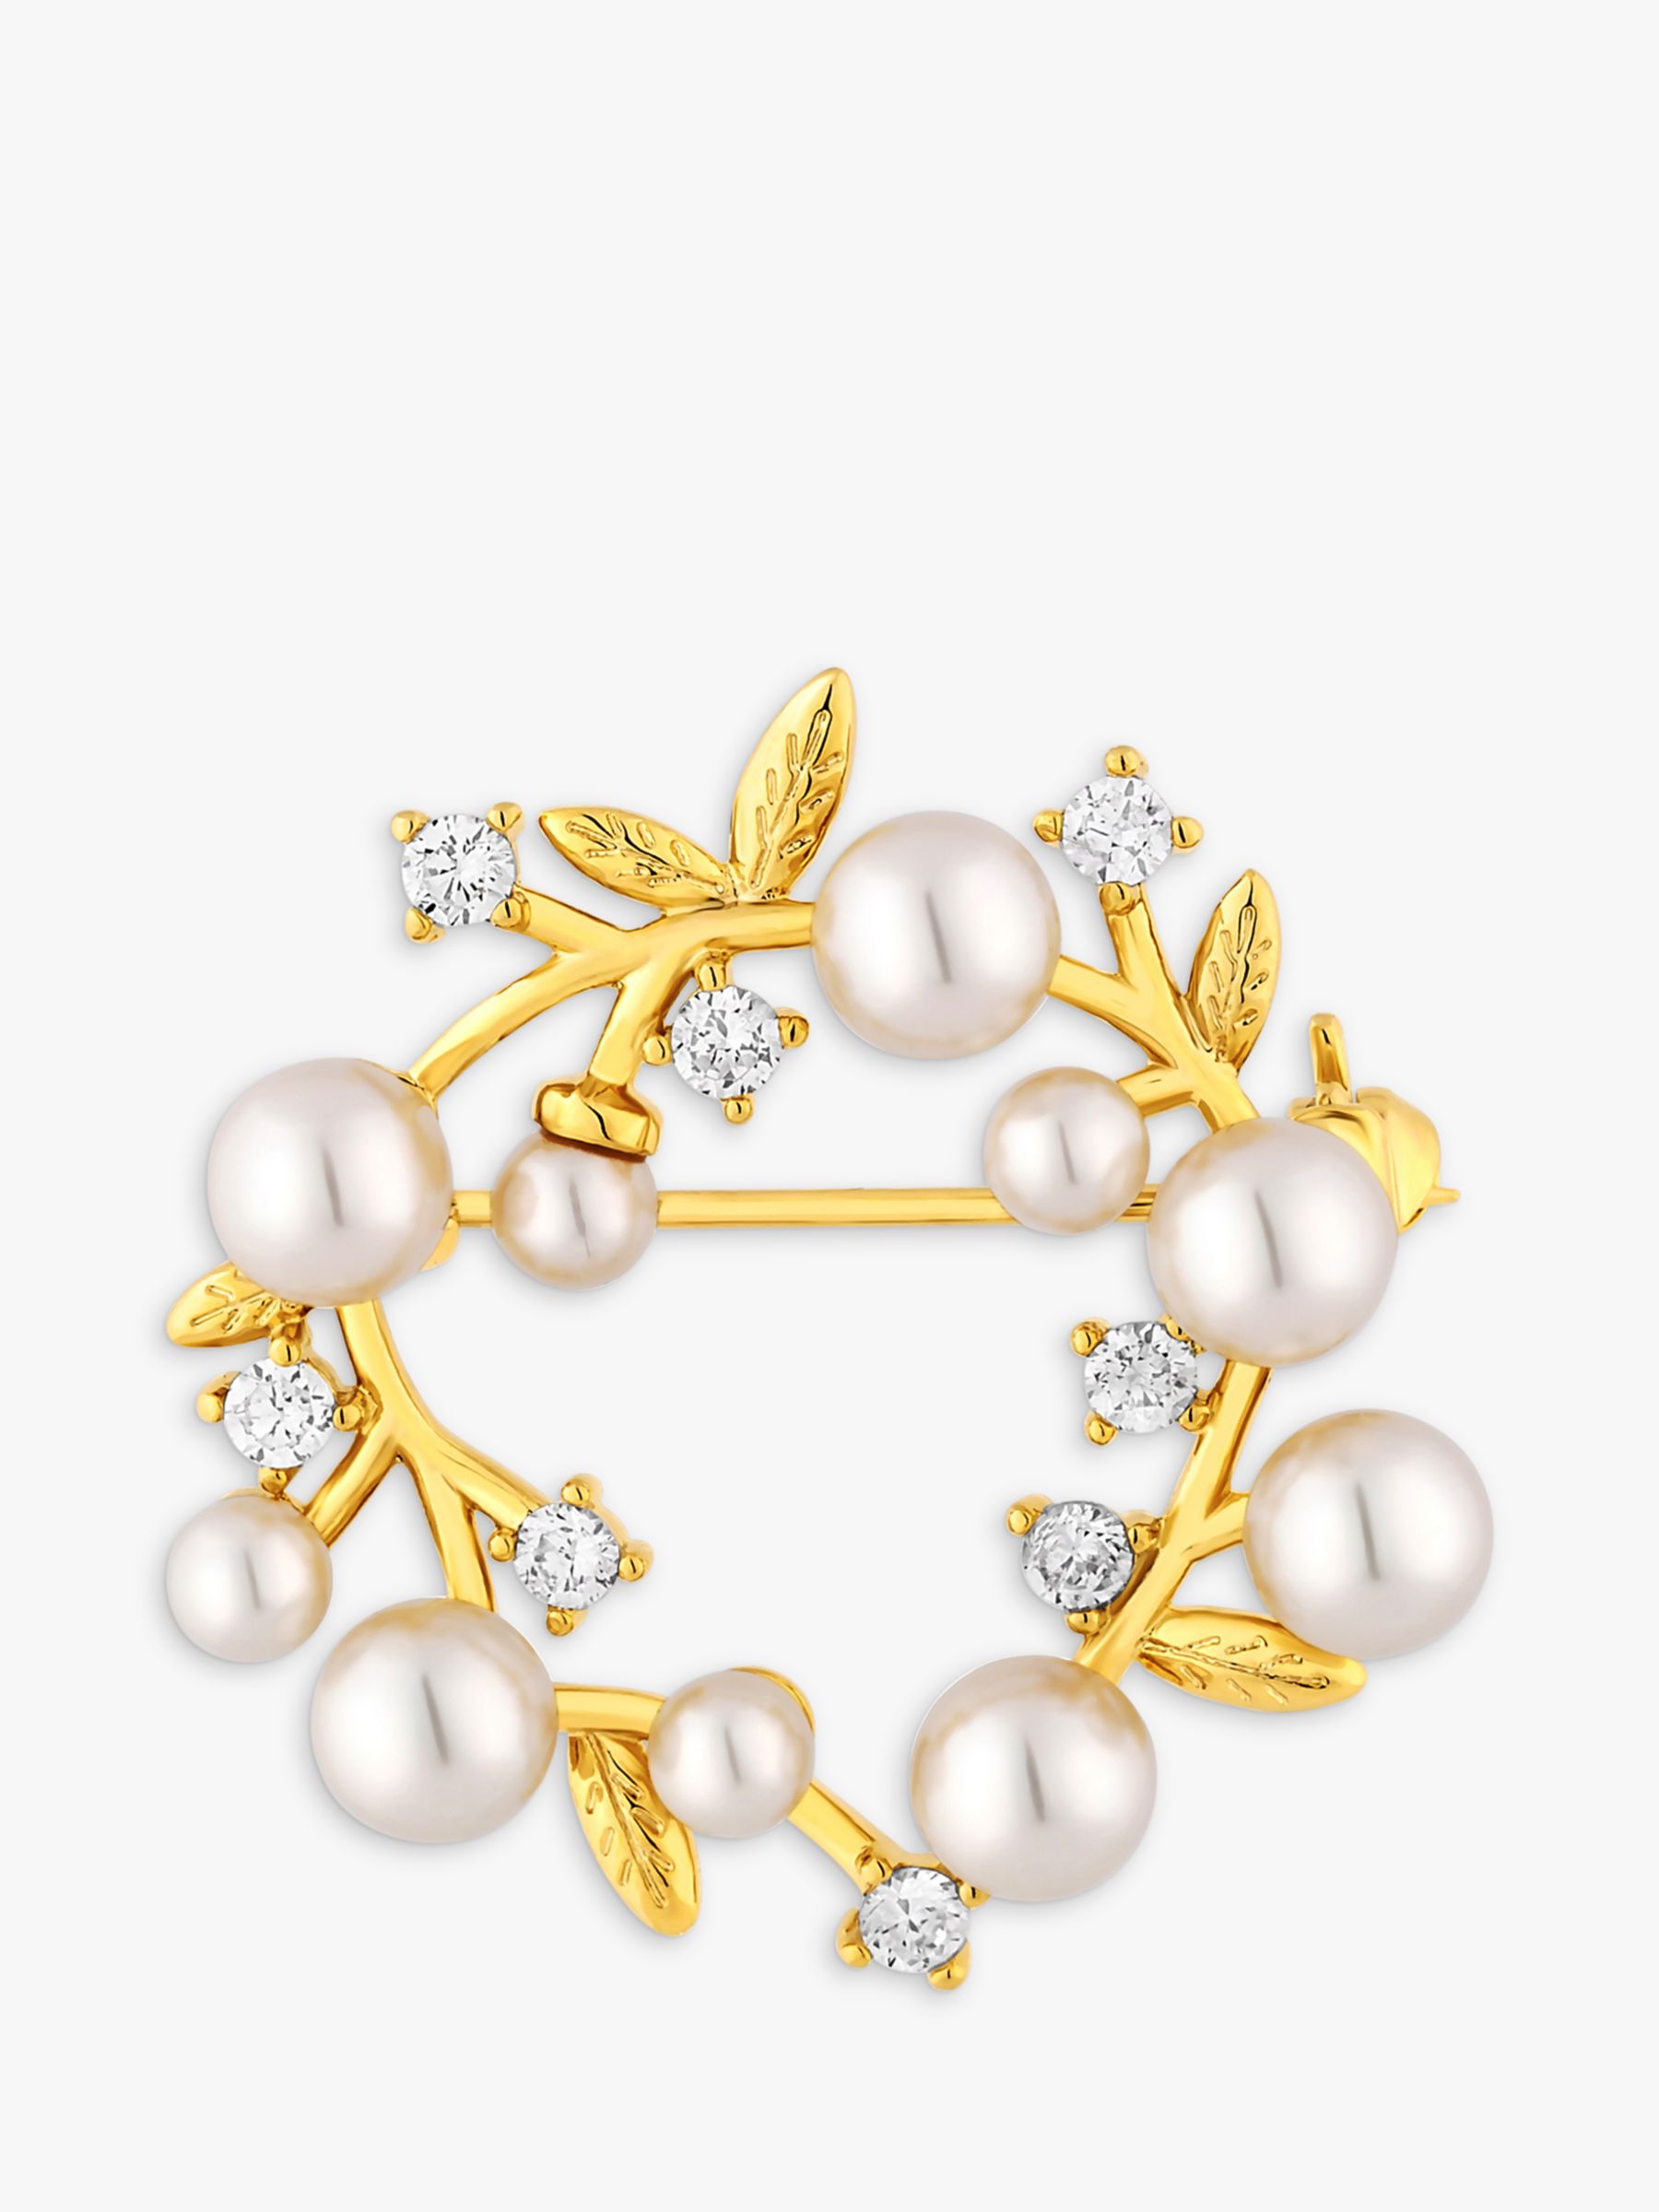 Buy Jon Richard Pearl and Cubic Zirconia Crystal Wreath Brooch, Gold Online at johnlewis.com